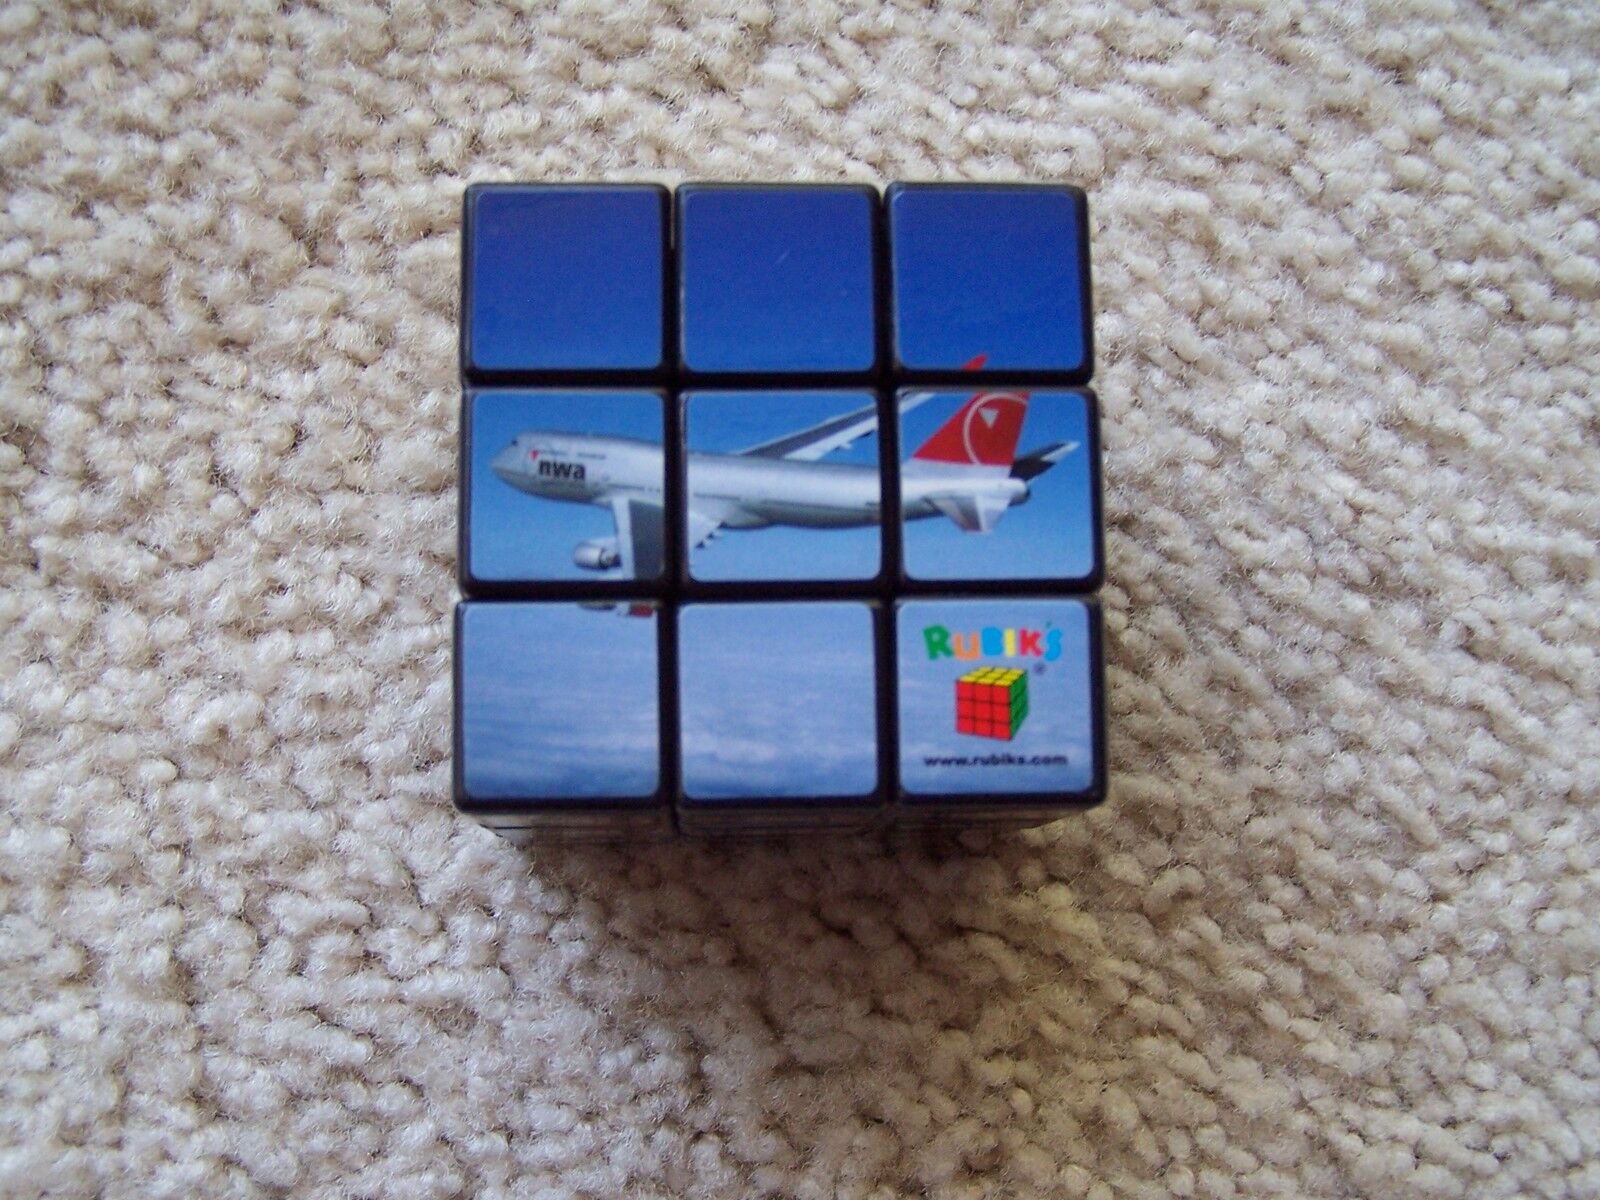 NORTHWEST AIRLINES BOEING 747 - A330 PROMOTIONAL OFFICIAL RUBIKS CUBE 